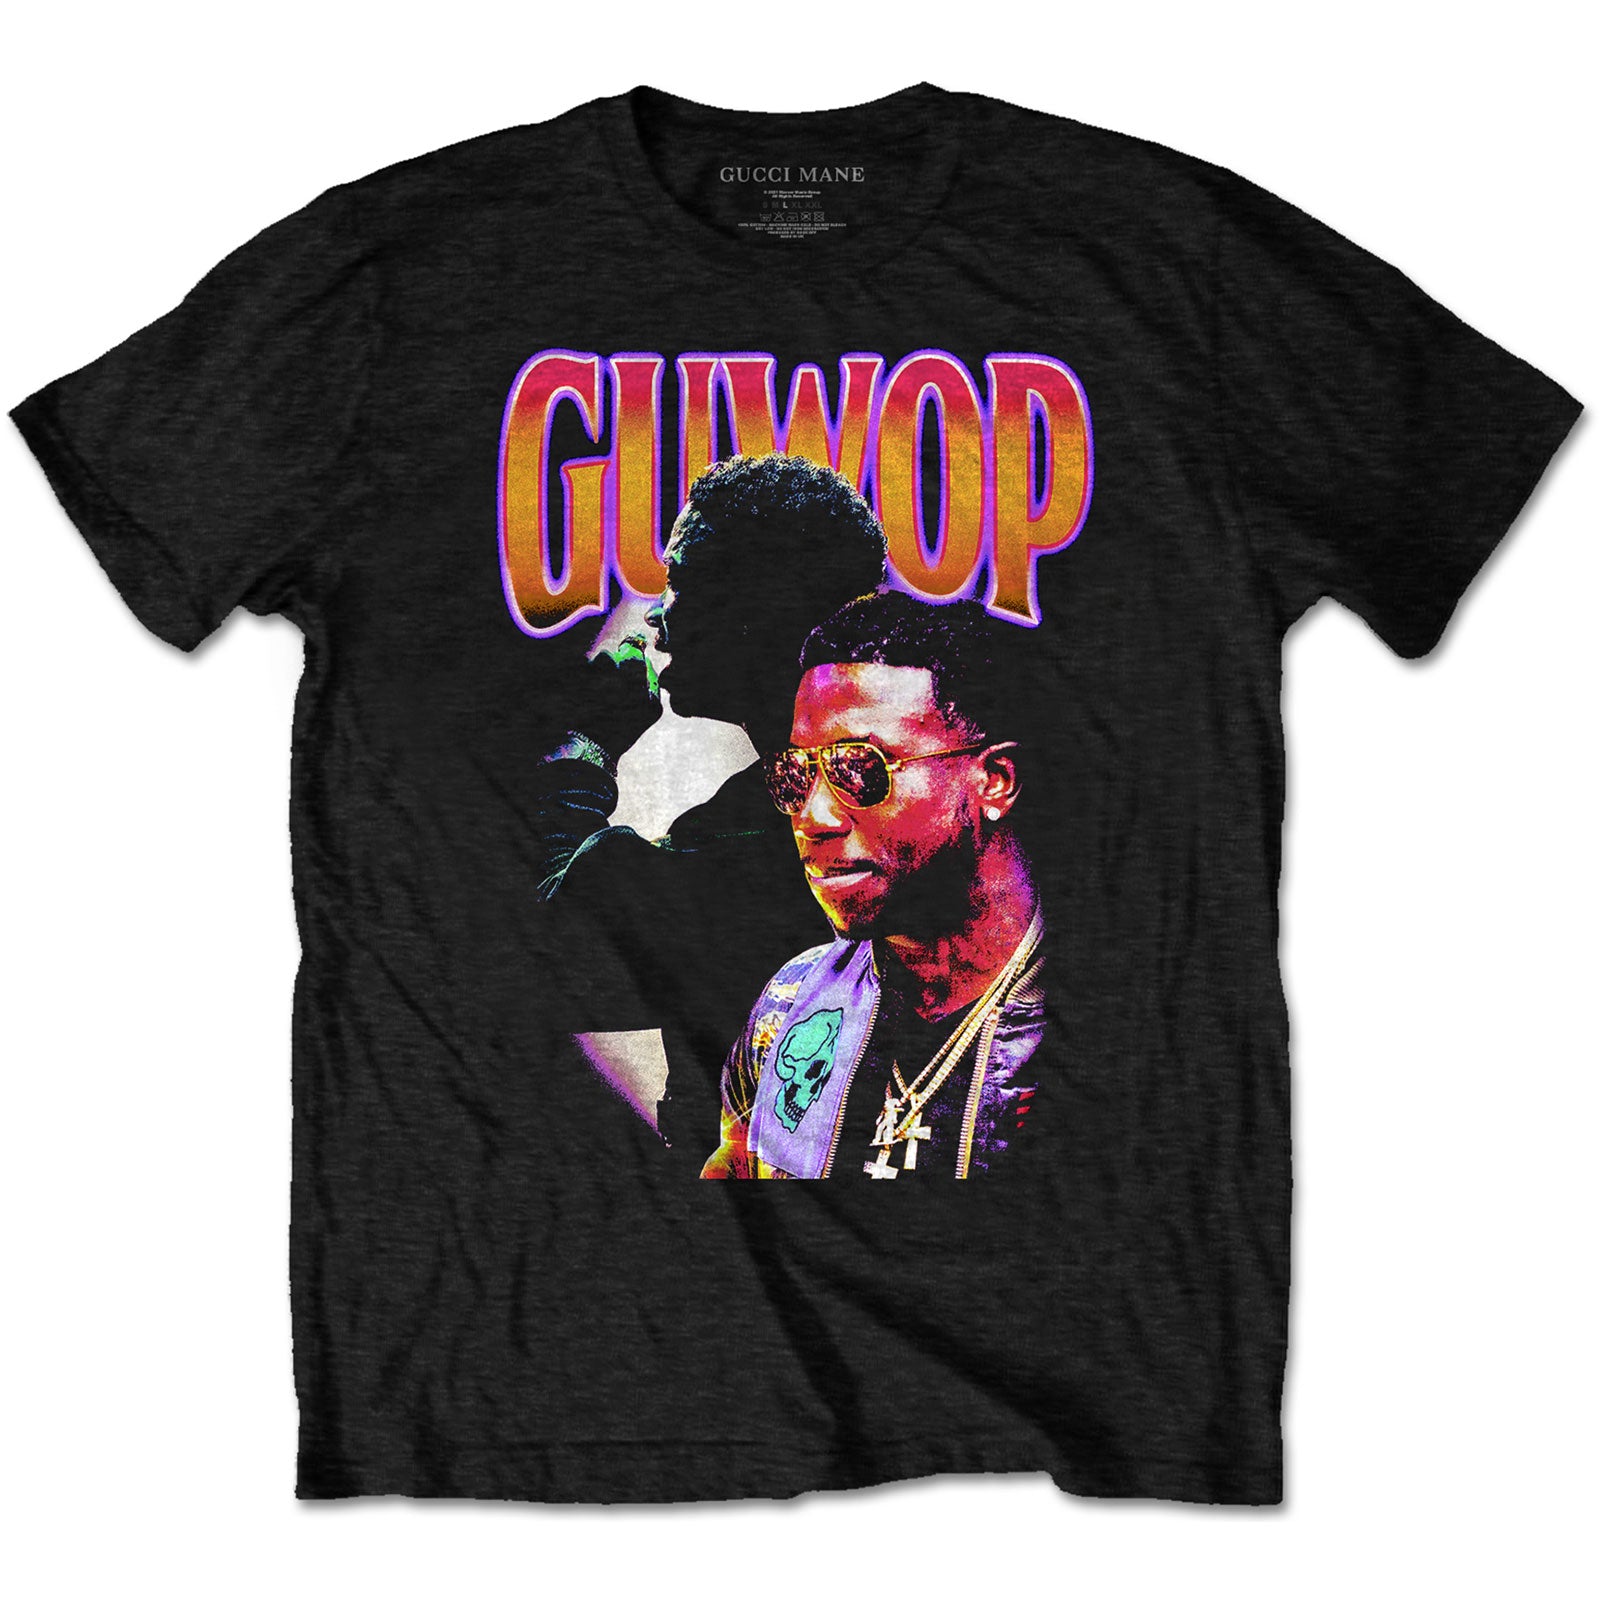 Gucci Mane Clothing for Sale